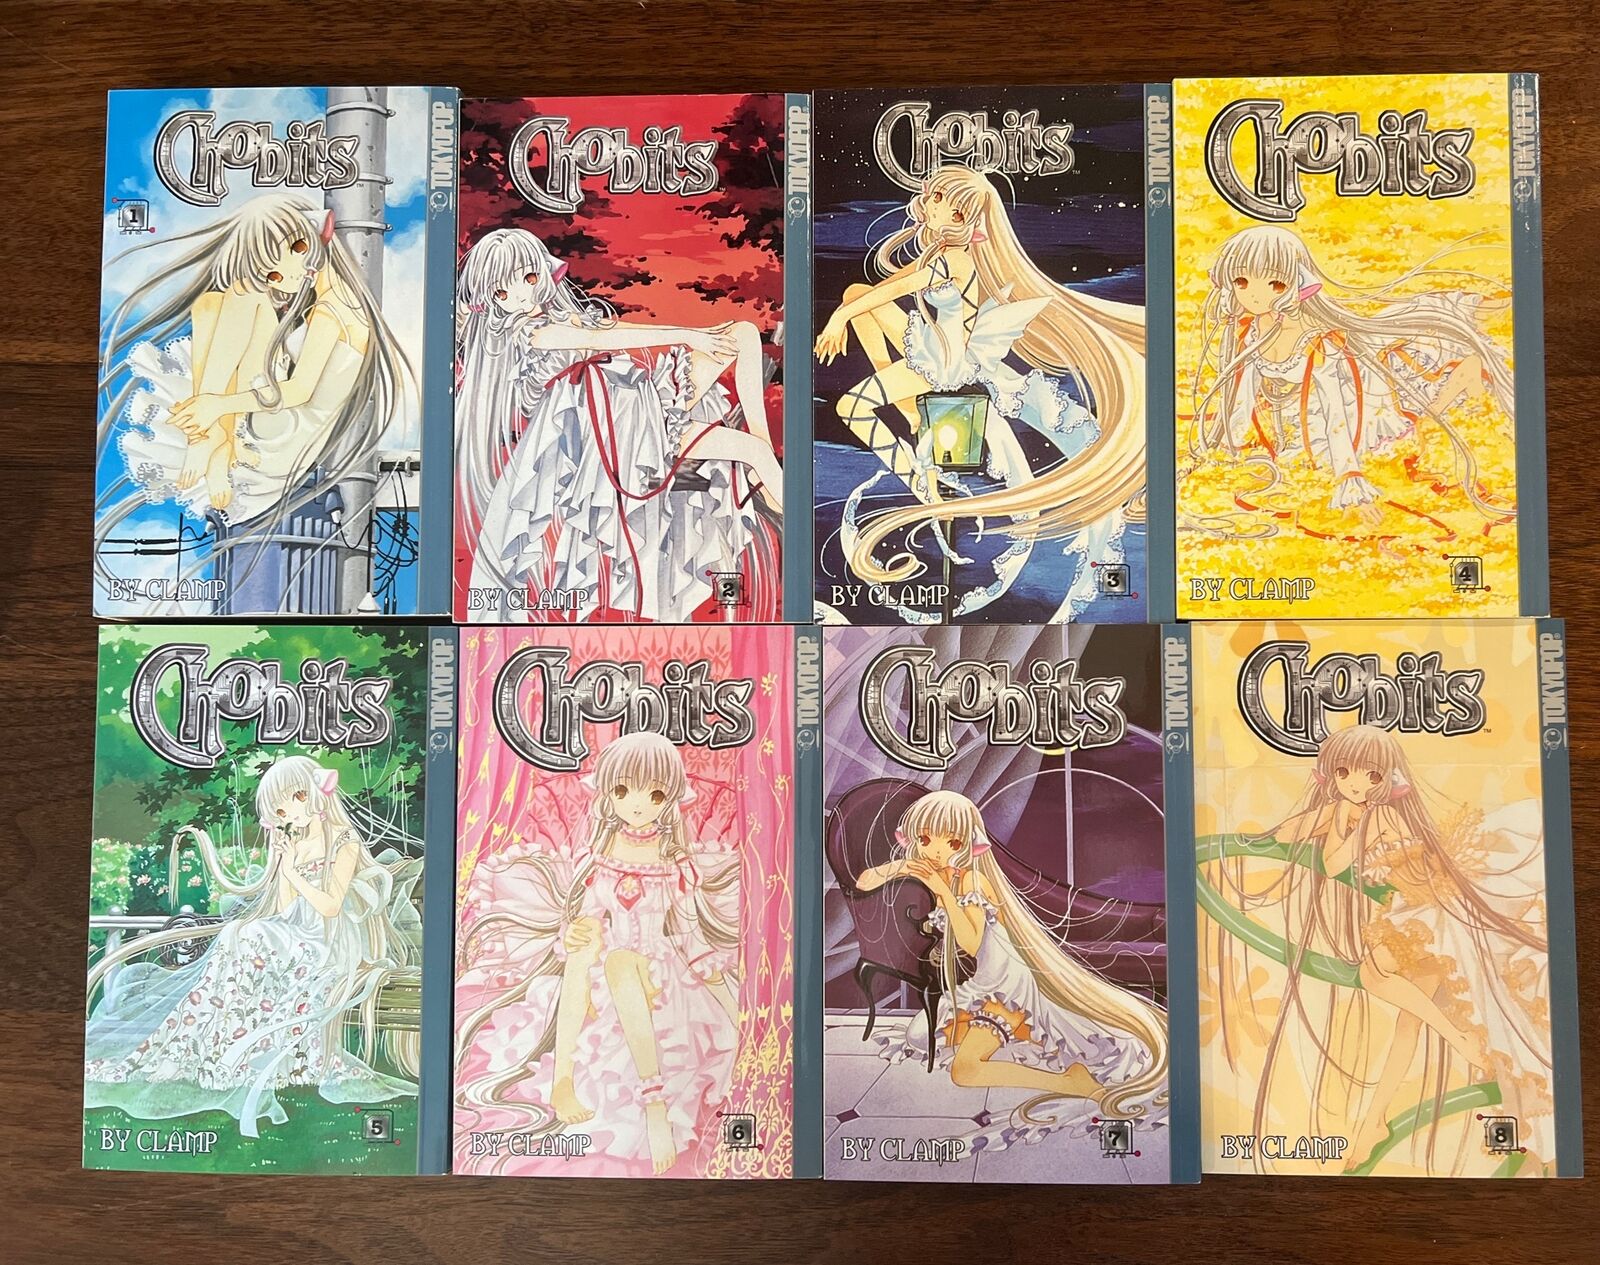 Chobits Vol 1-8 (Complete Series) English Manga TokyoPop by Clamp